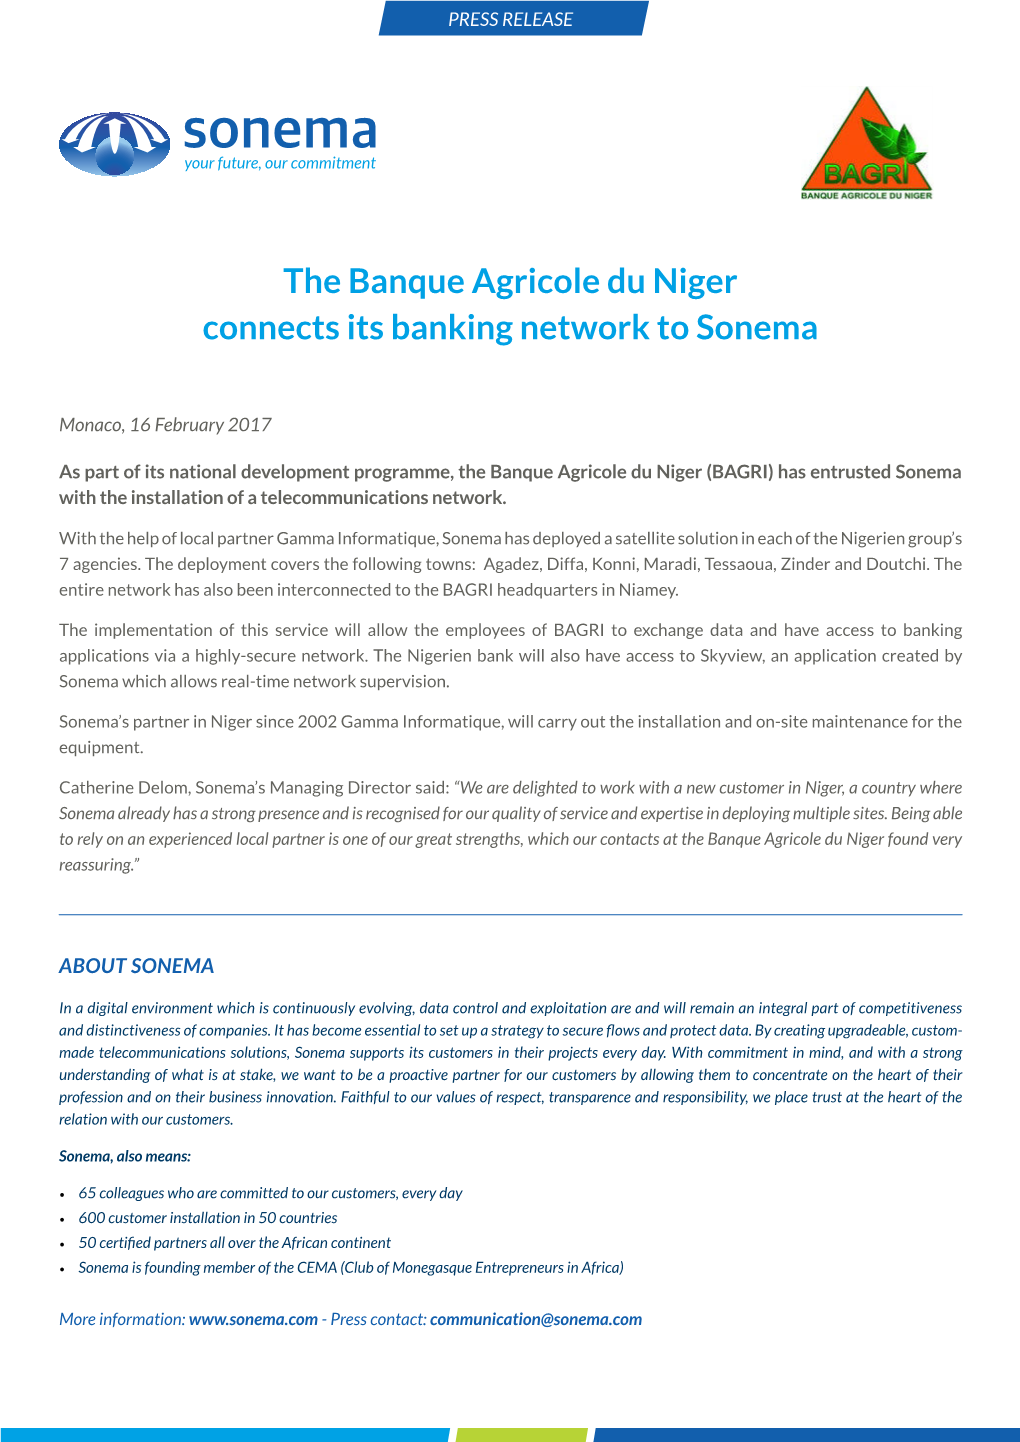 The Banque Agricole Du Niger Connects Its Banking Network to Sonema